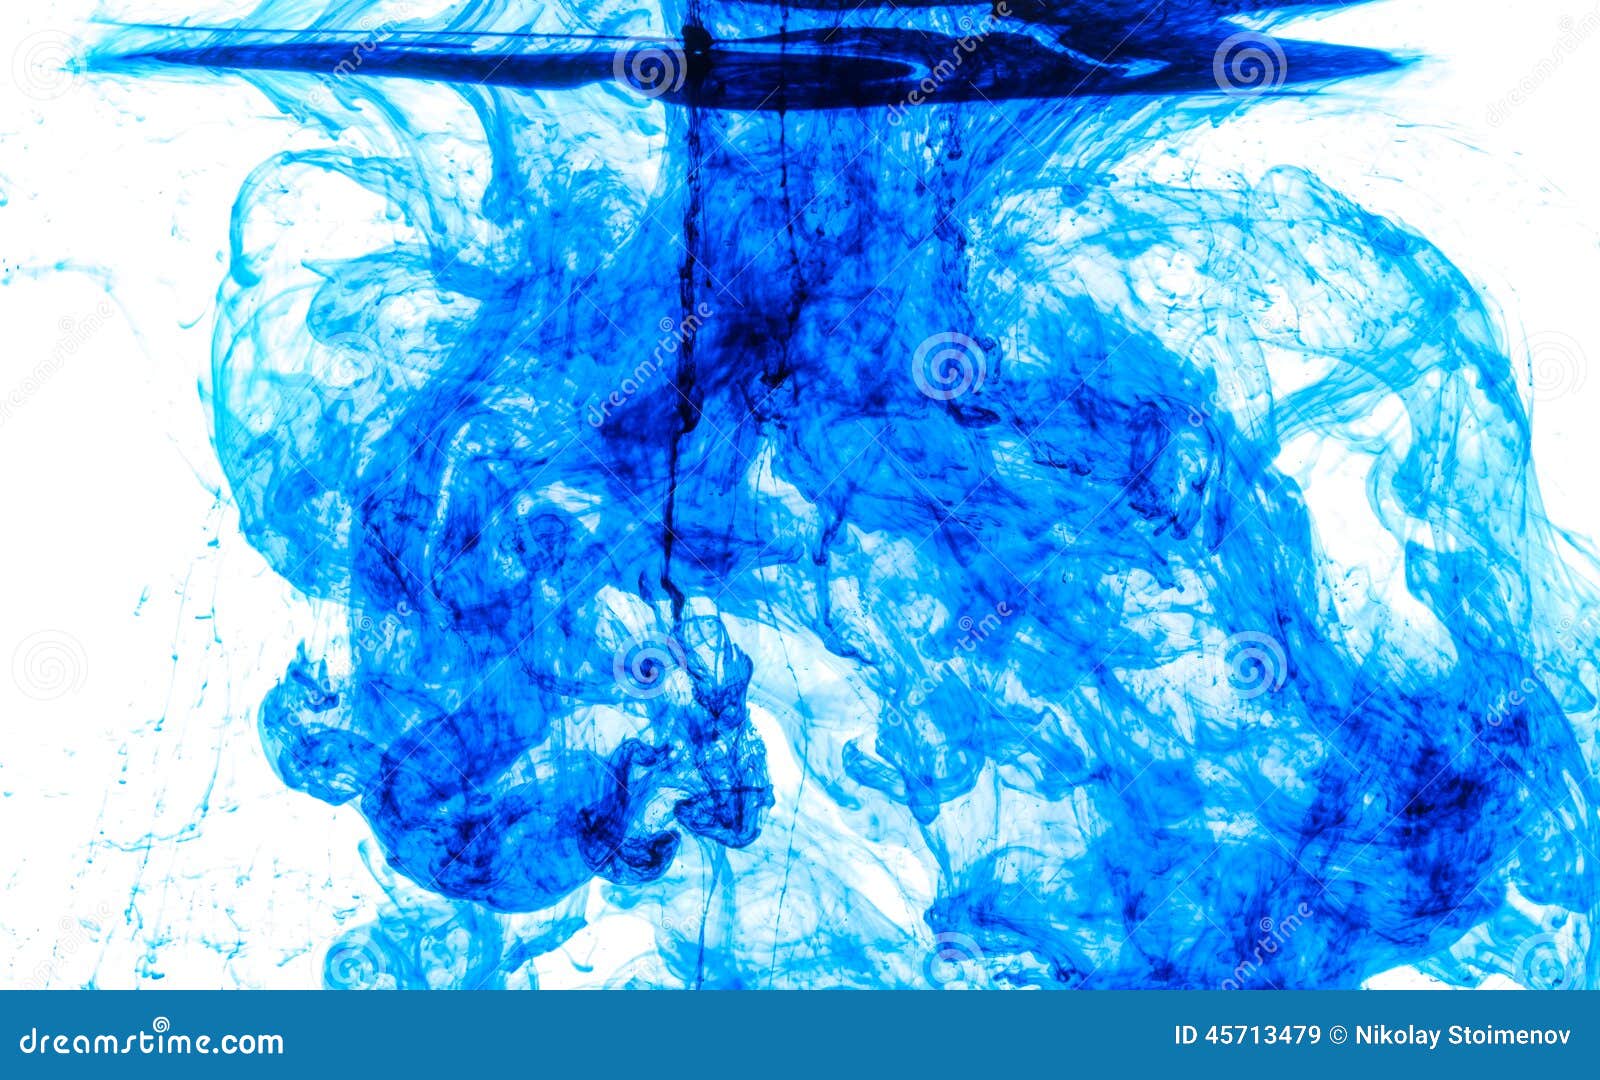 Color in water stock image. Image of dissolving, science - 45713479